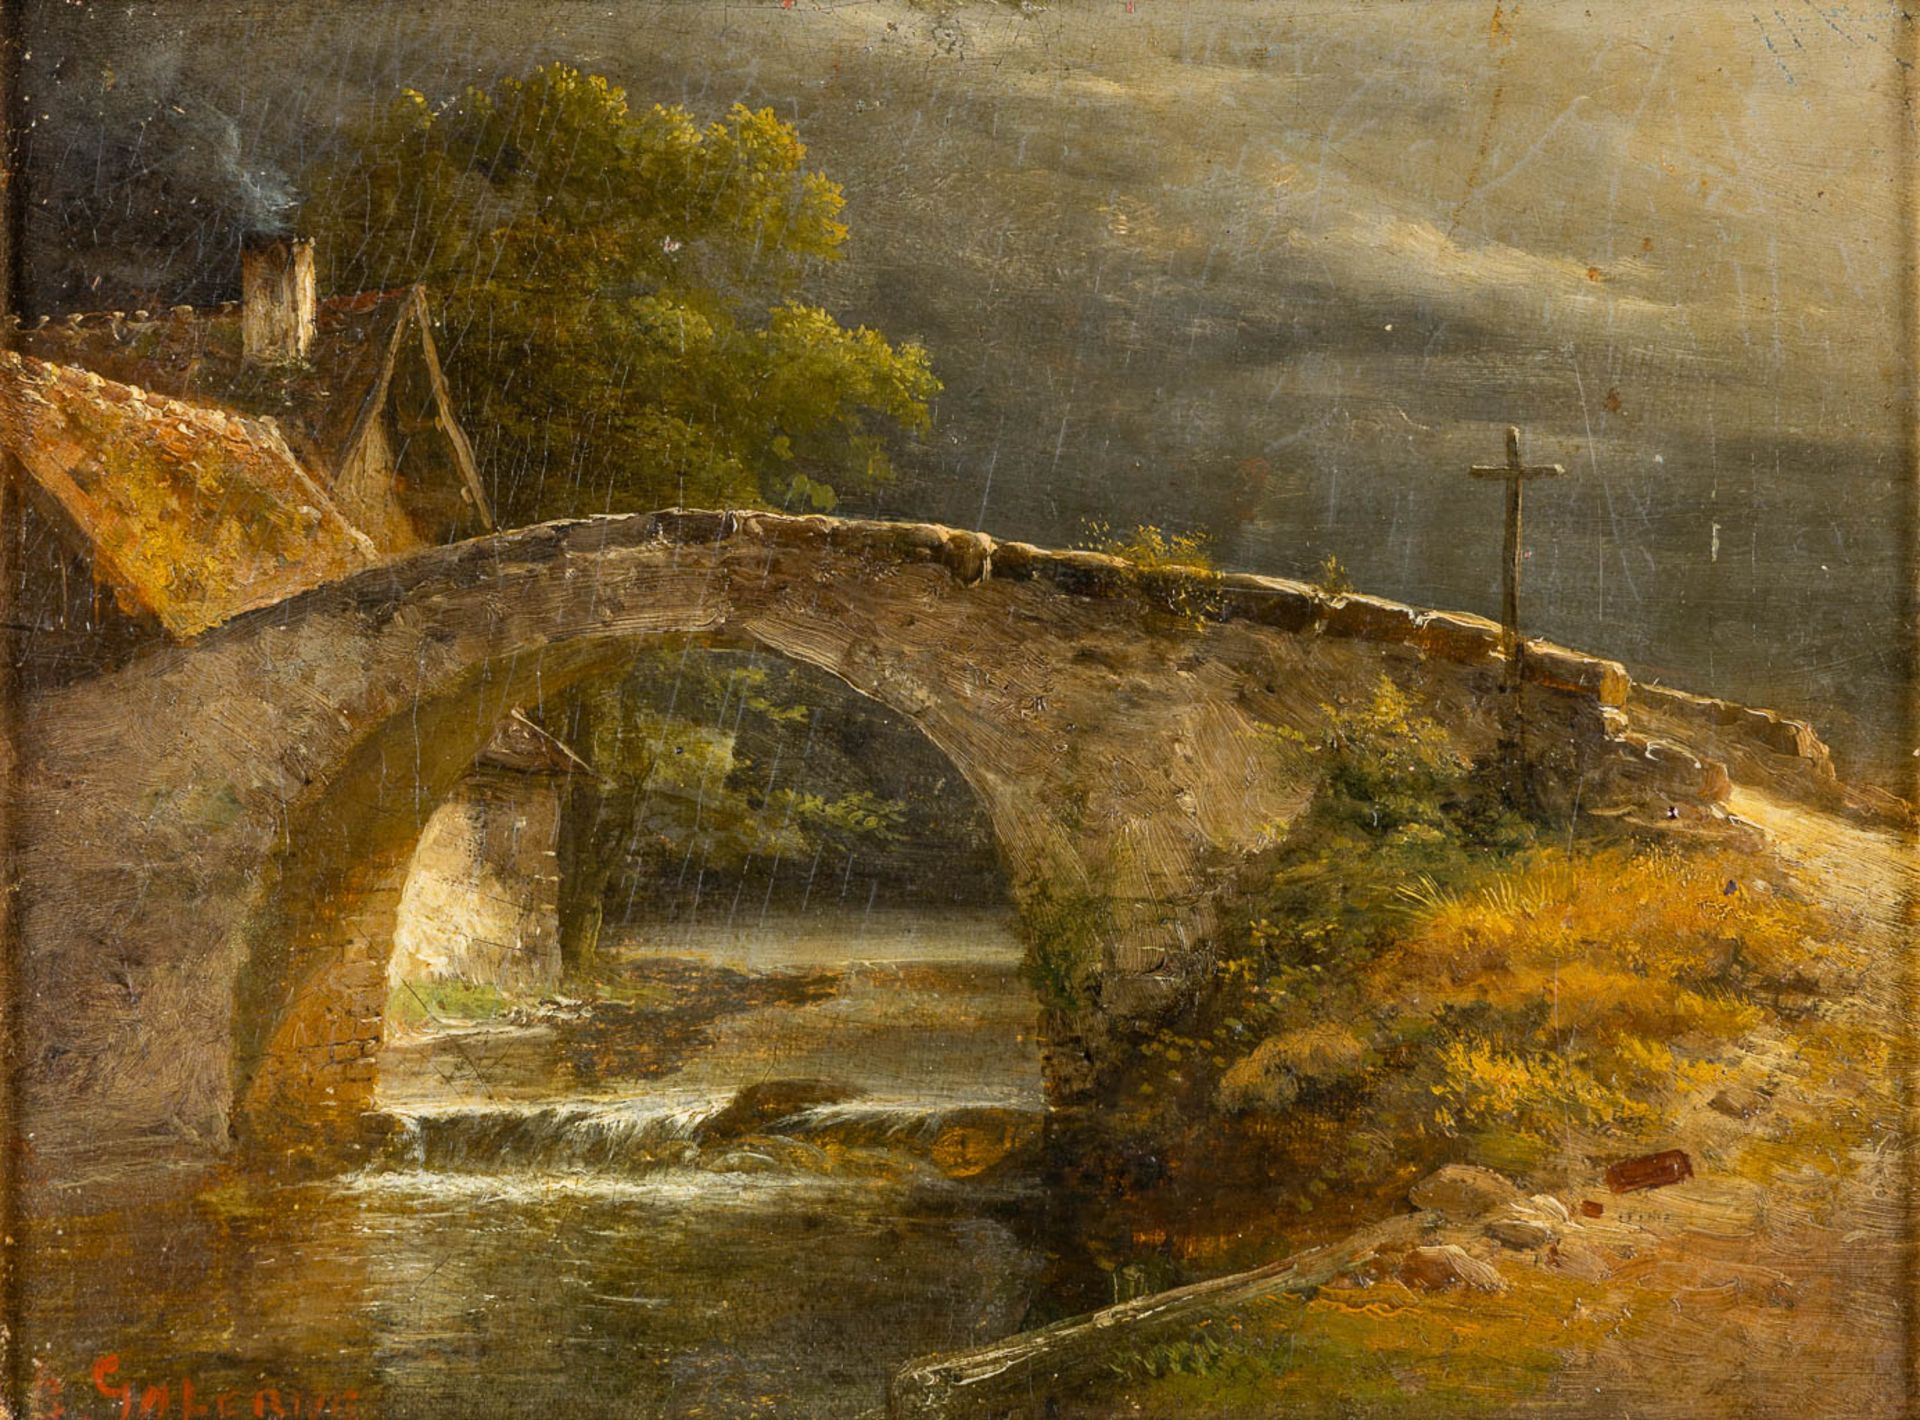 The bridge over the river, oil on panel. 19th C. Signed B. Galerne. (W:32 x H:24,5 cm)